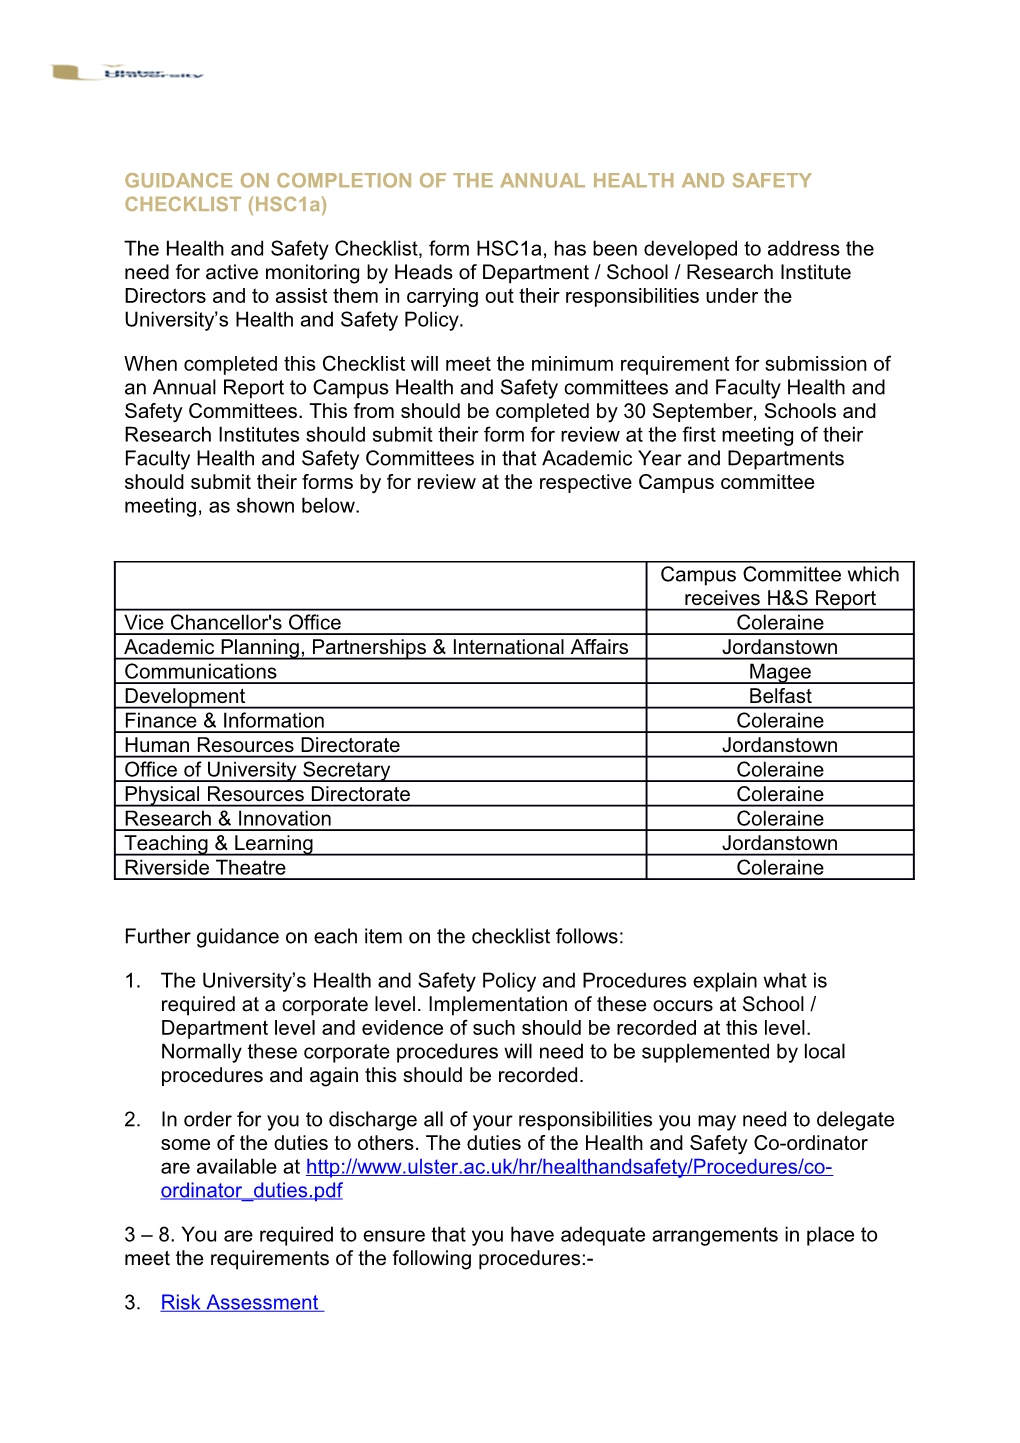 GUIDANCE on COMPLETION of the ANNUAL HEALTH and SAFETY CHECKLIST (Hsc1a)